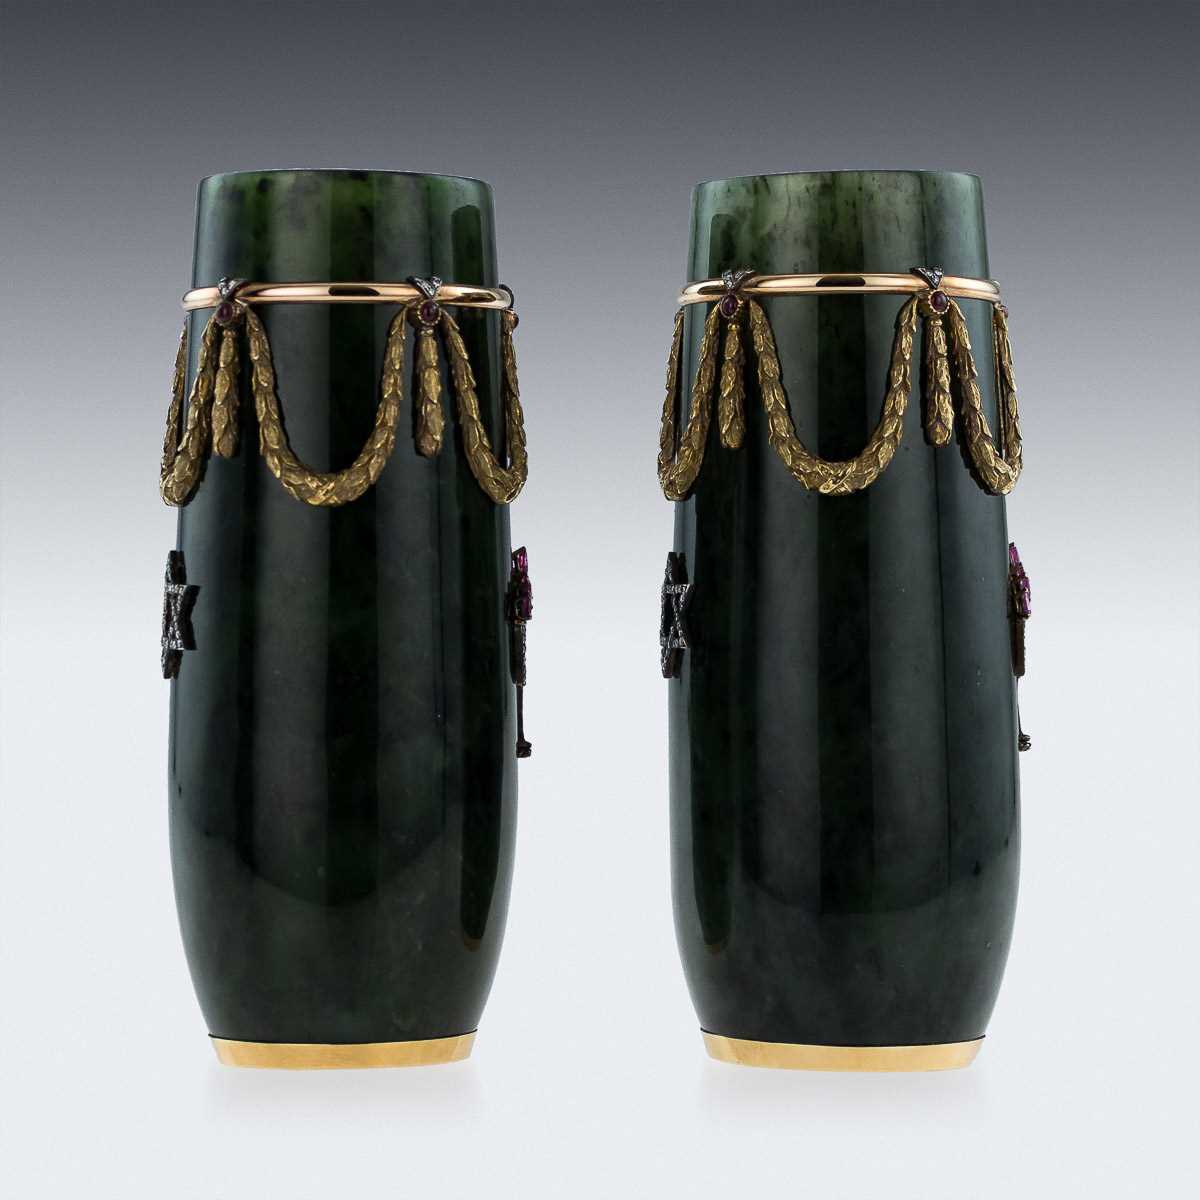 A PAIR 14CT GOLD, NEPHRITE, DIAMOND AND RUBY ENCRUSTED VASES IN THE STYLE OF FABERGE - Image 10 of 15